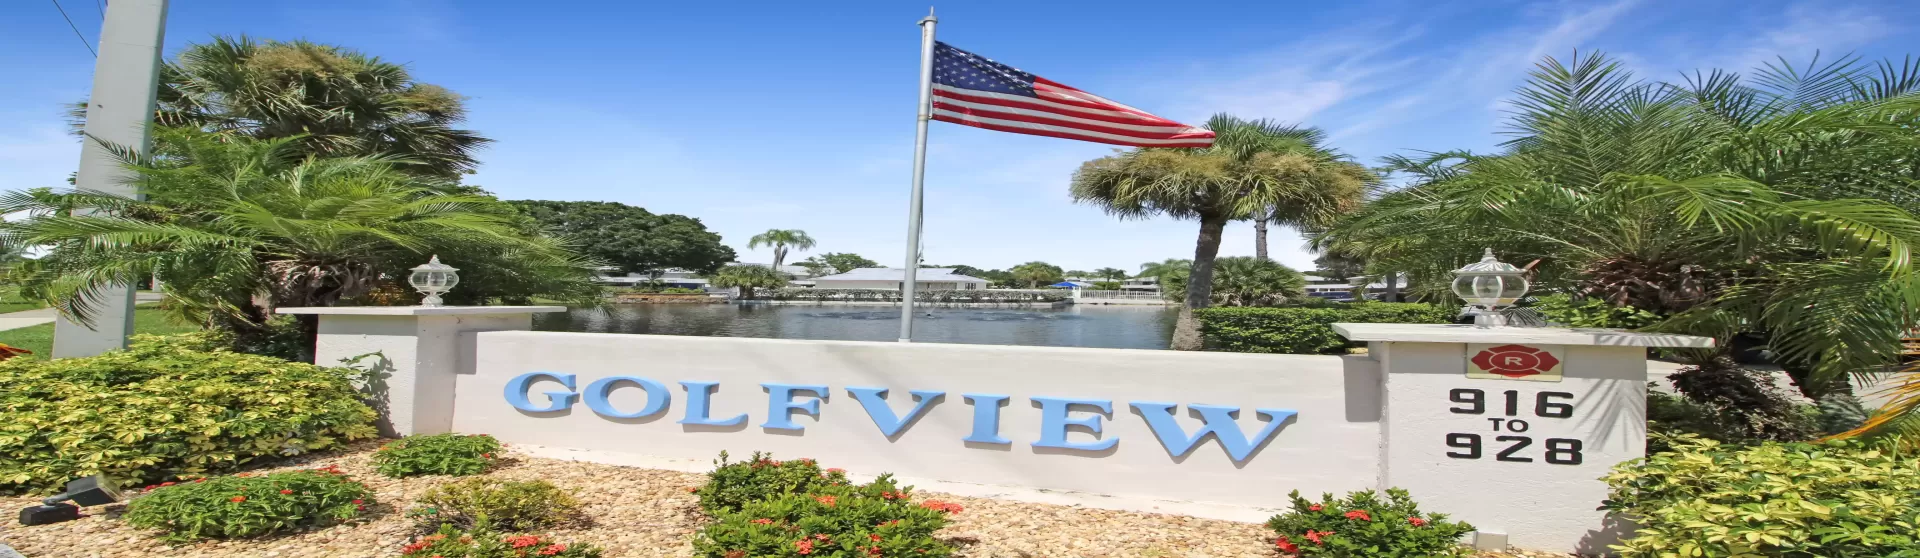 Golfview Annual Condo for Rent